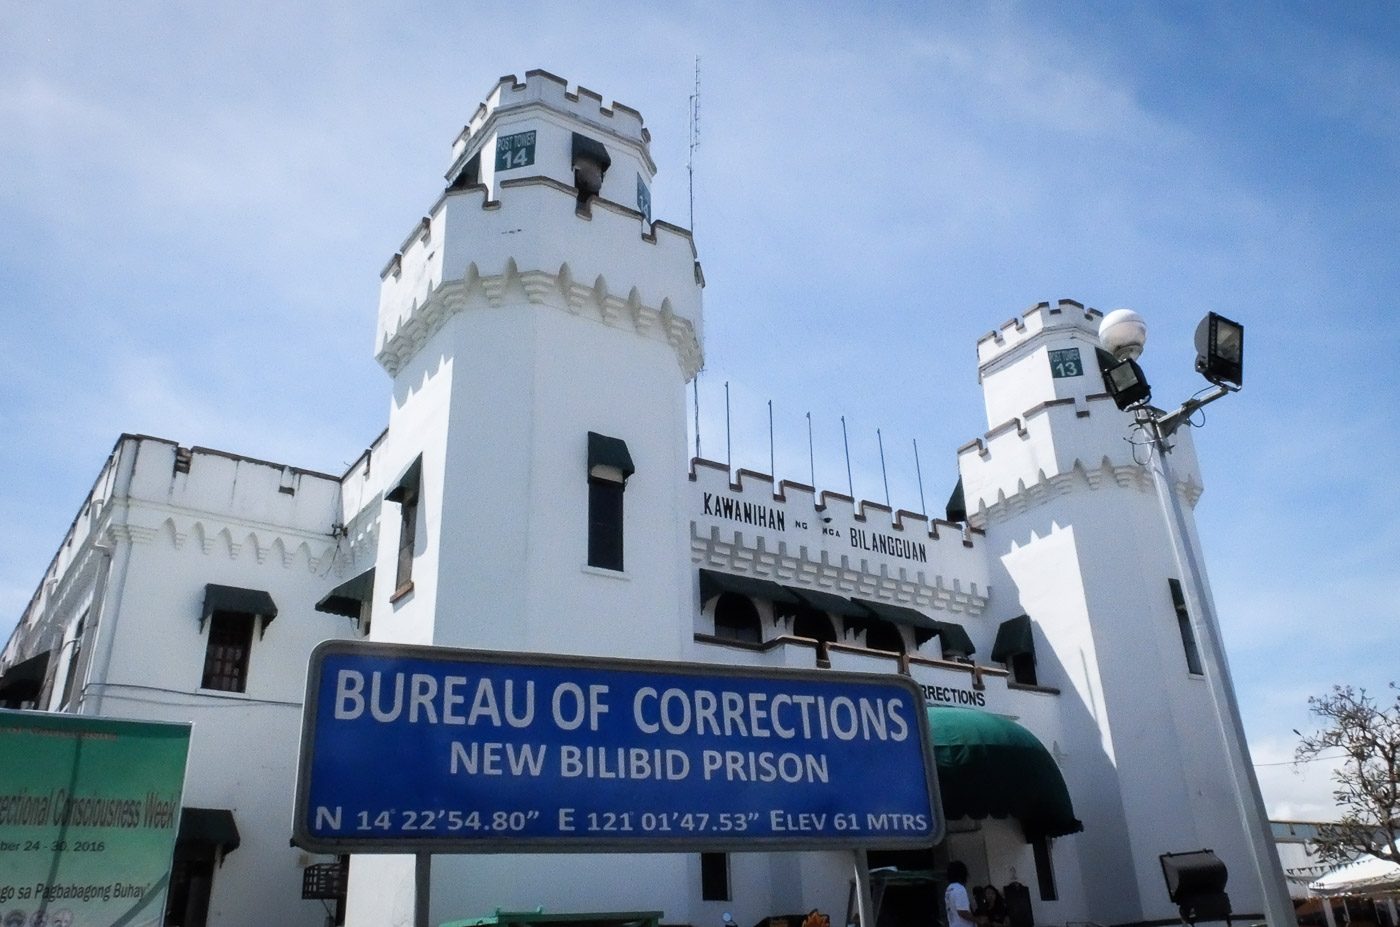 DOJ scrambling to release qualified convicts ‘who should not have surrendered’